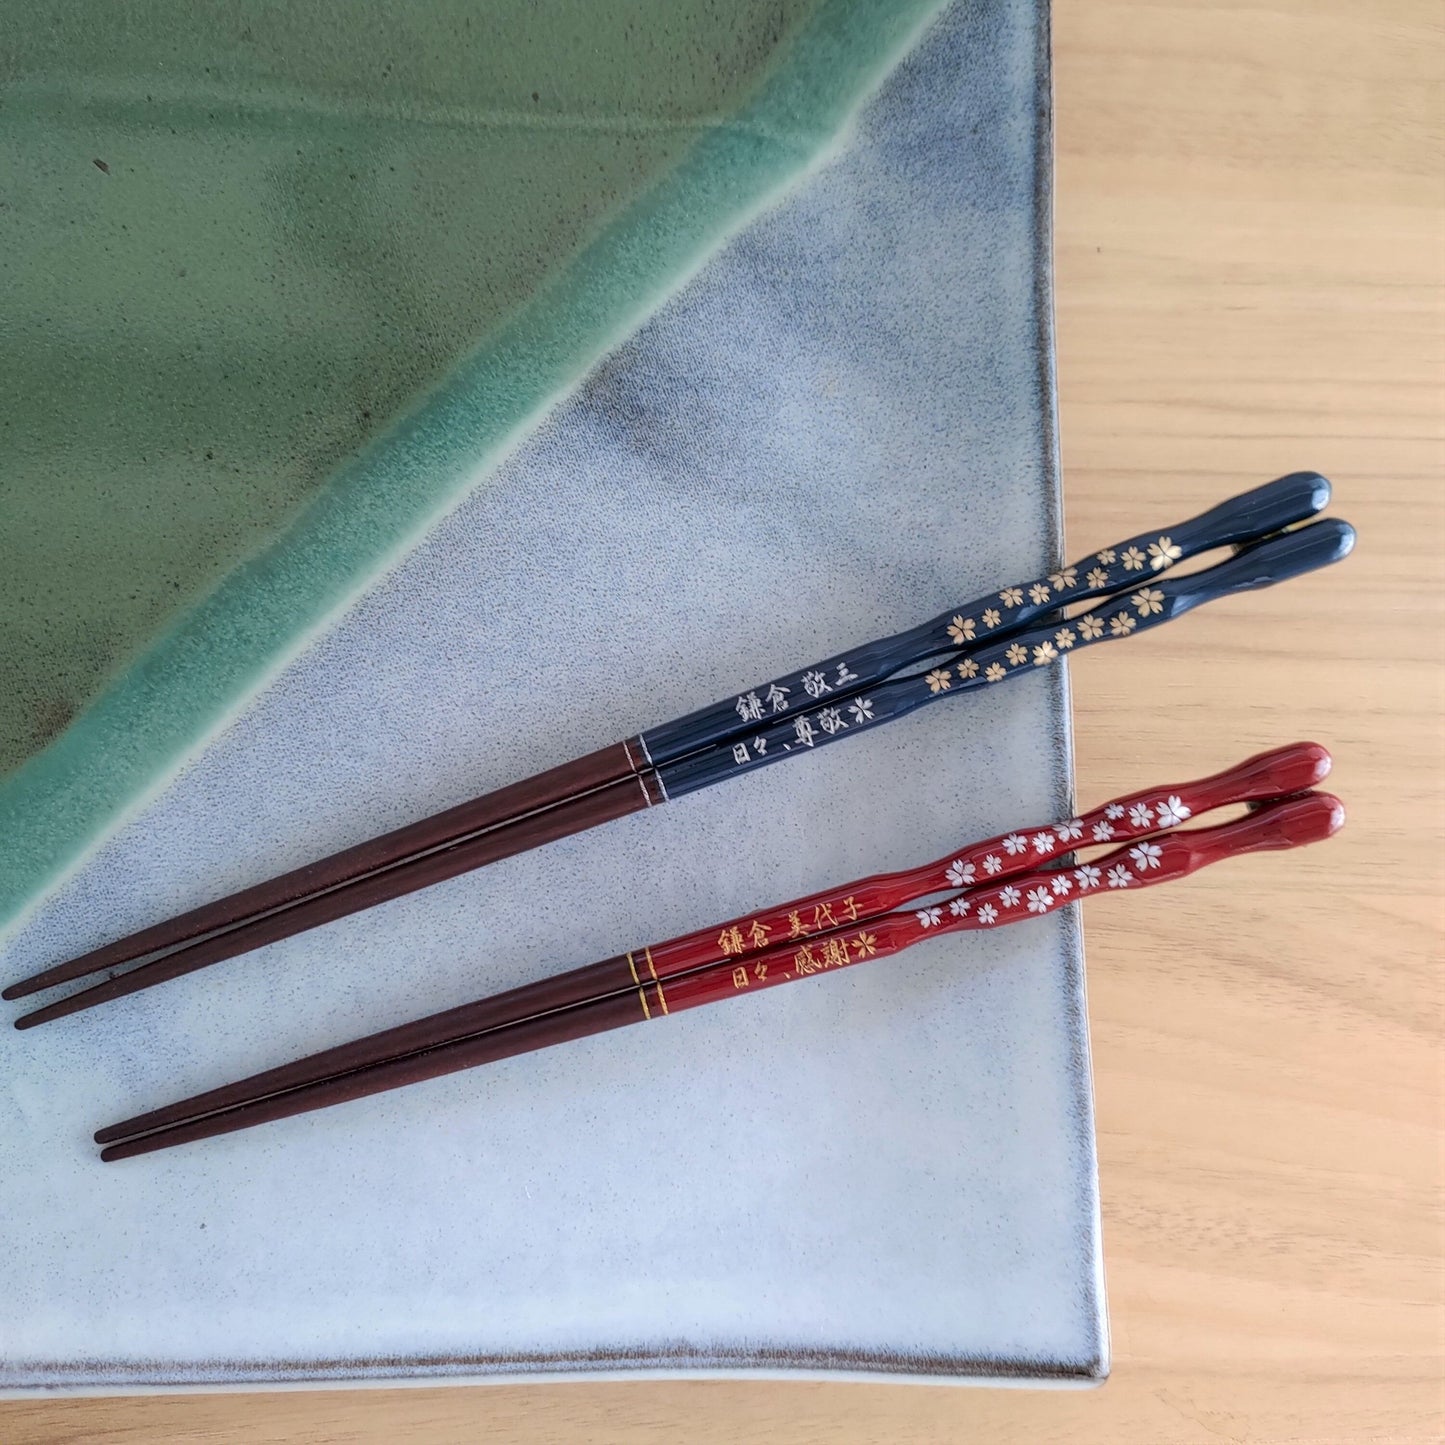 Gold and silver cherry blossoms Japanese chopsticks blue red - SINGLE PAIR